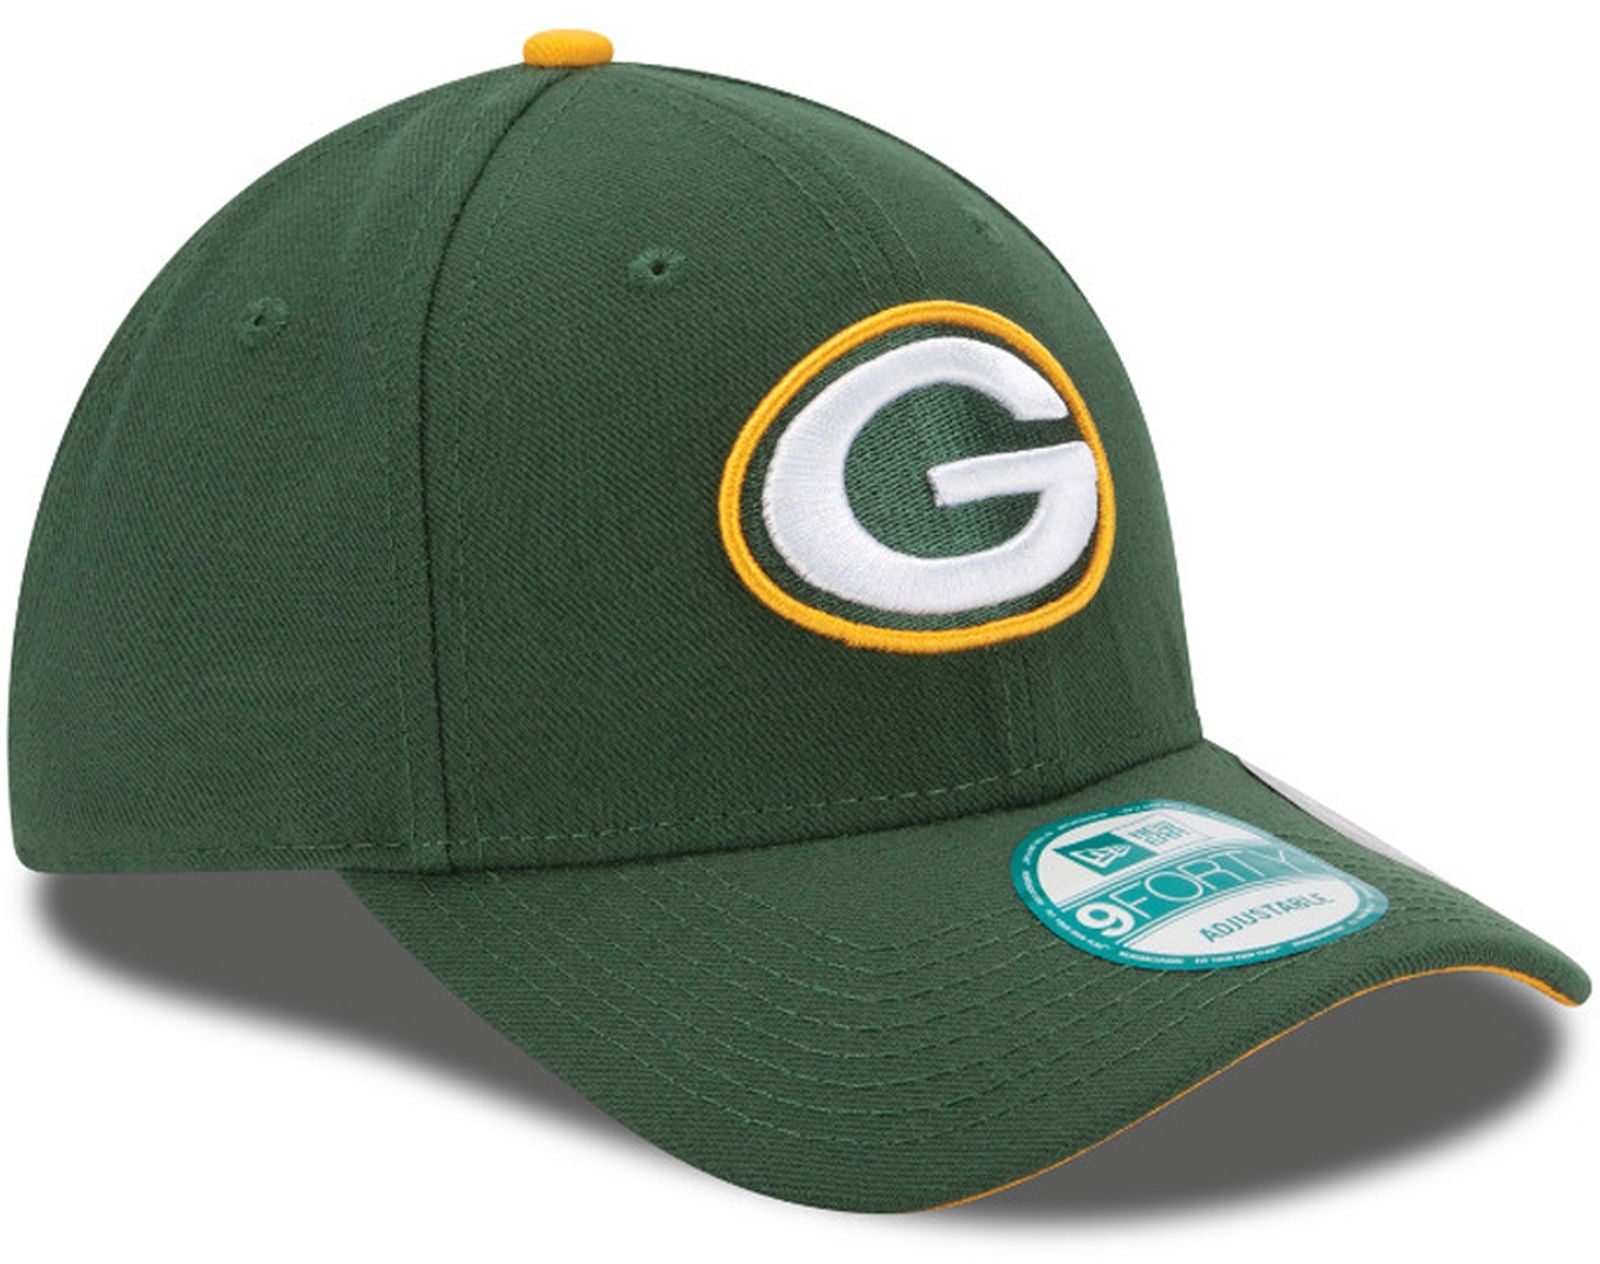 New Era - NFL Green Bay Packers The League 9Forty Cap - green